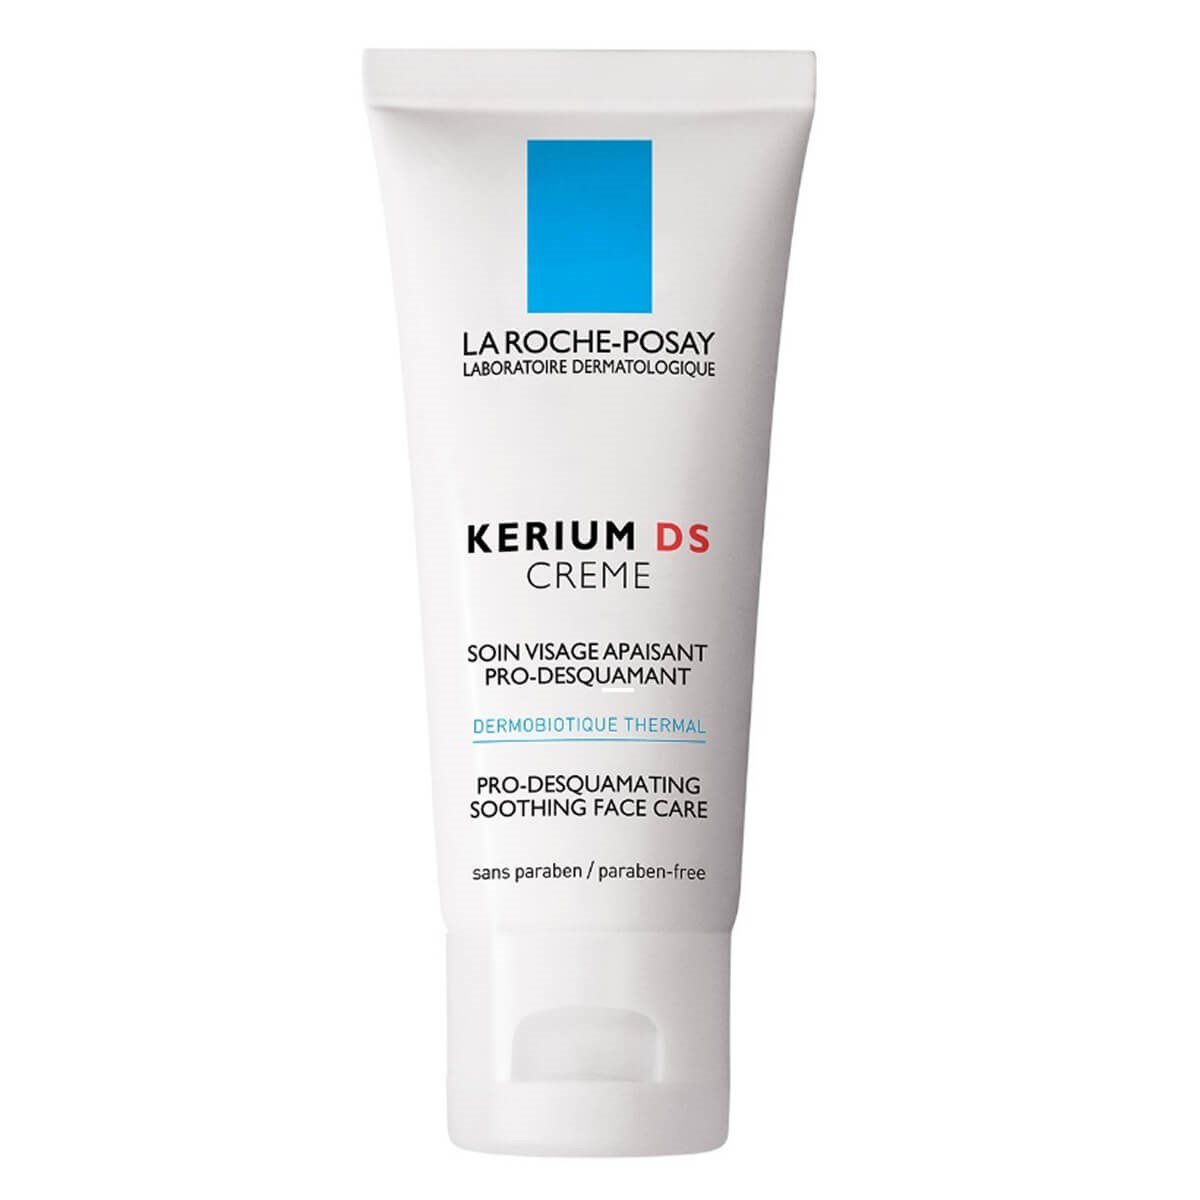 La Roche Posay Kerium DS Cream Pro-Desquamating Soothing Face Care 60ml